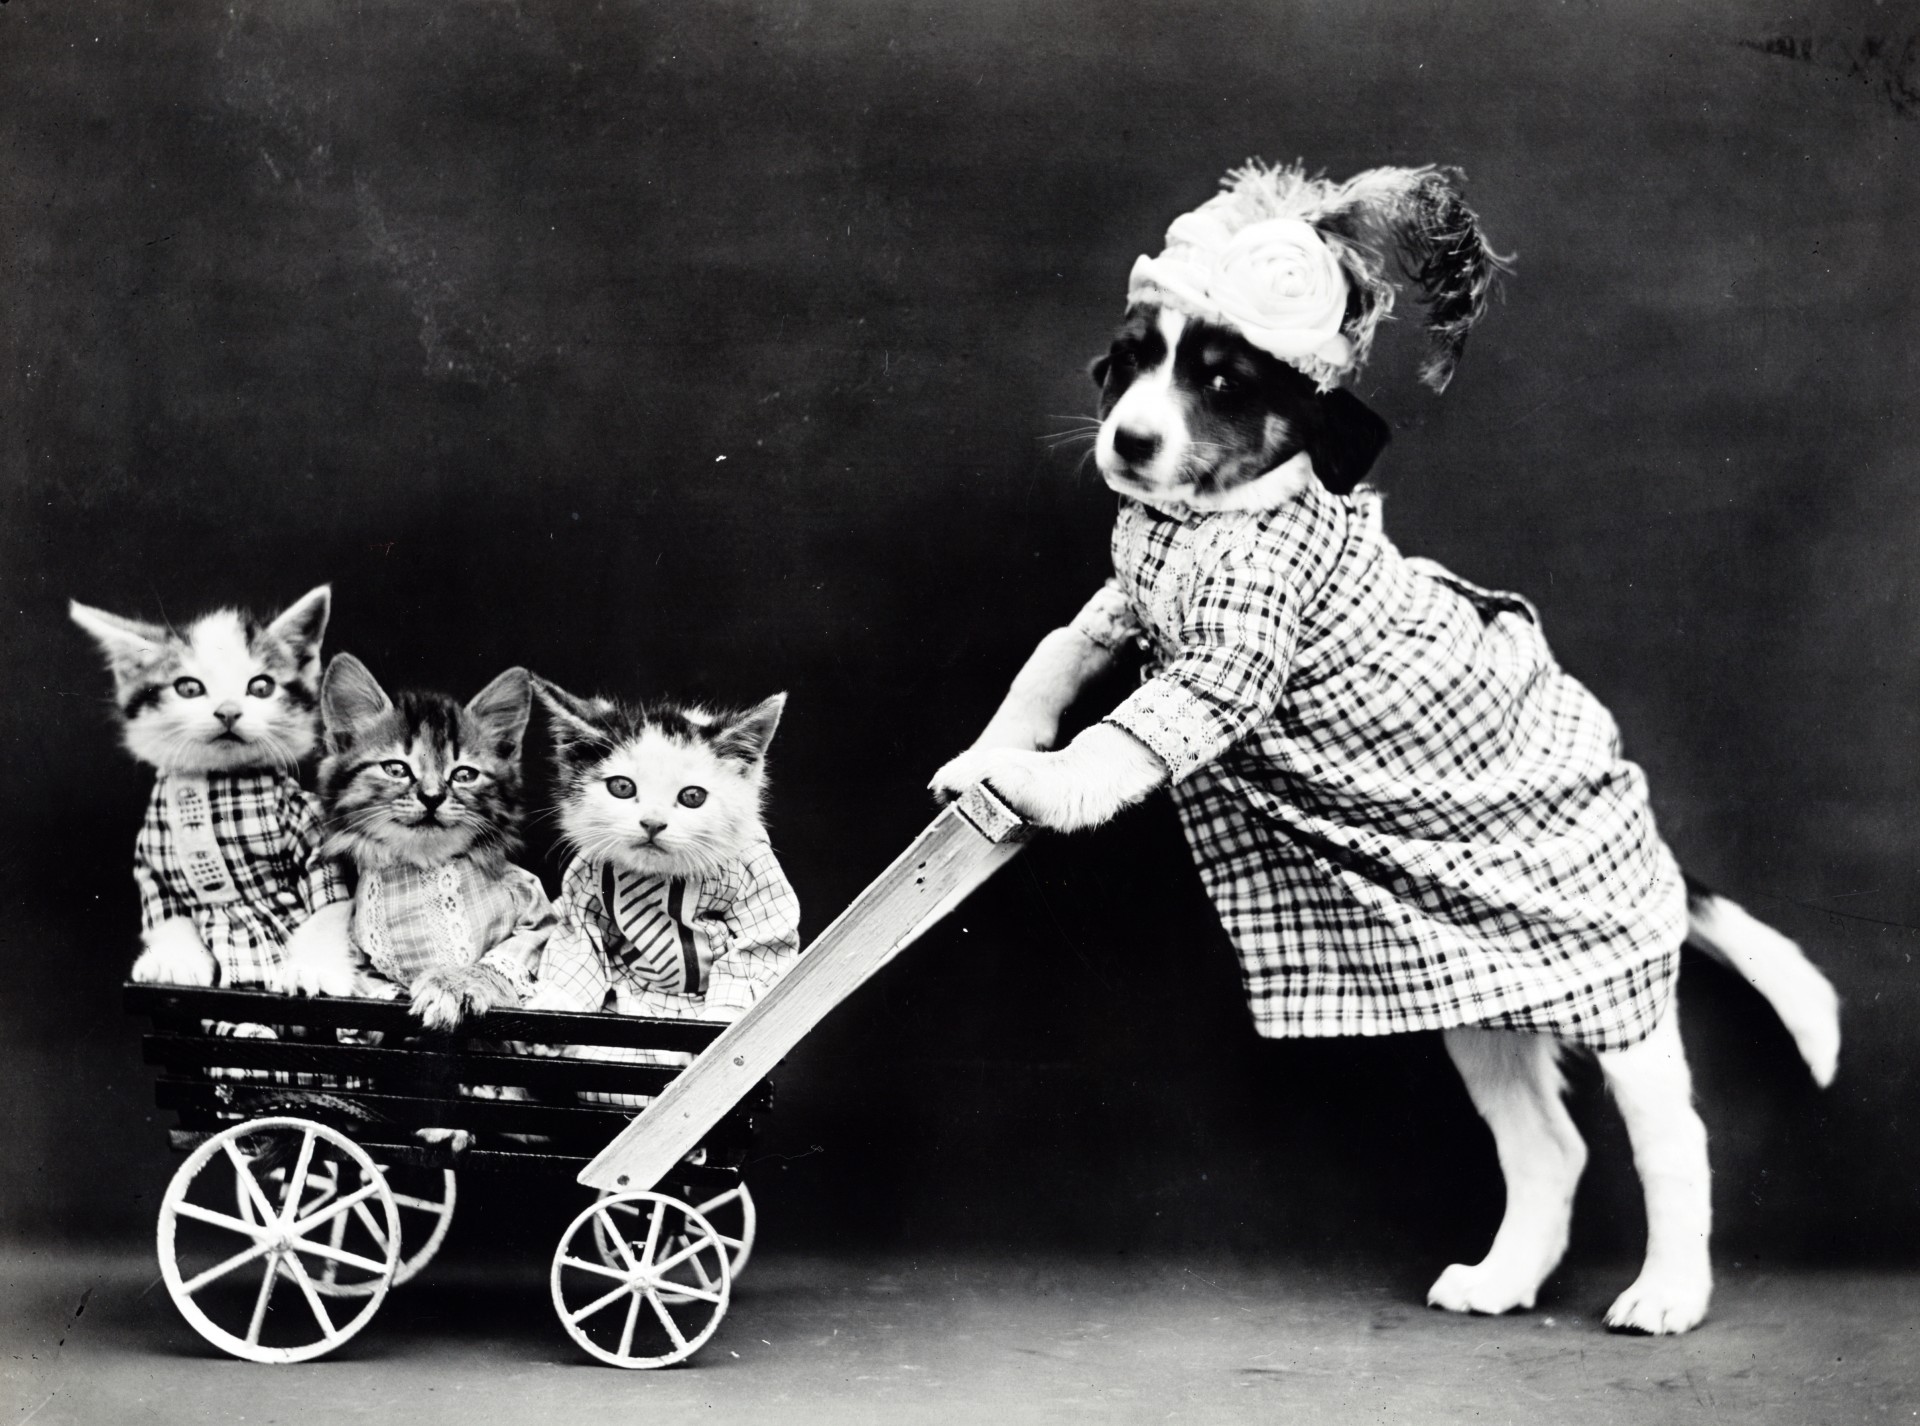 Public domain vintage 1900s photo of three kittens and a puppy dog dressed in human situation